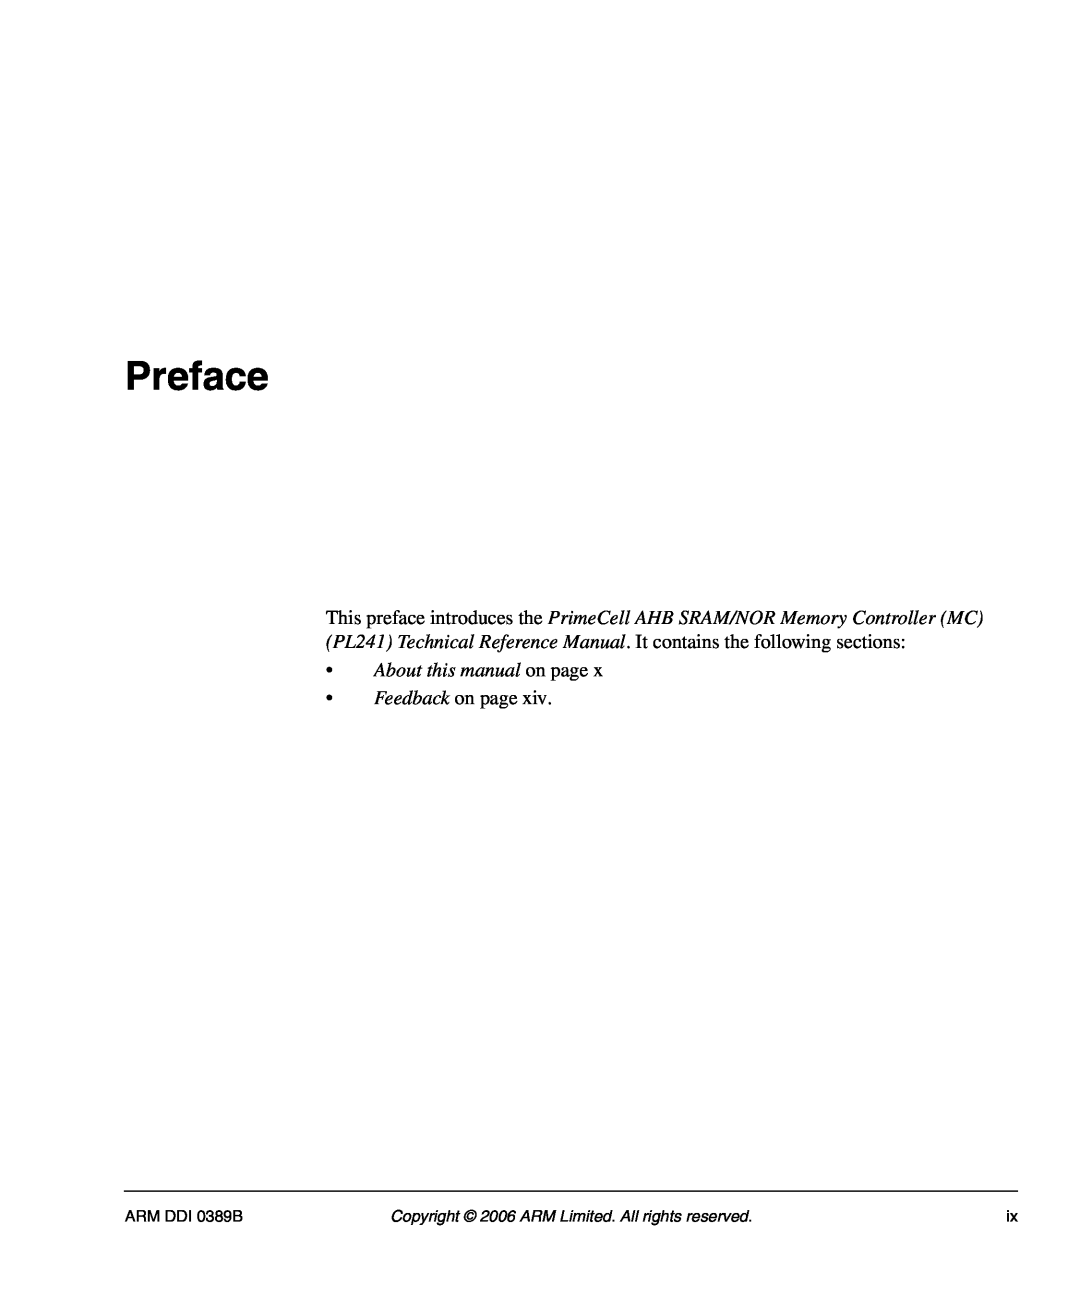 SMC Networks AHB SRAM/NOR, PL241 Preface, About this manual on page, Feedback on page 